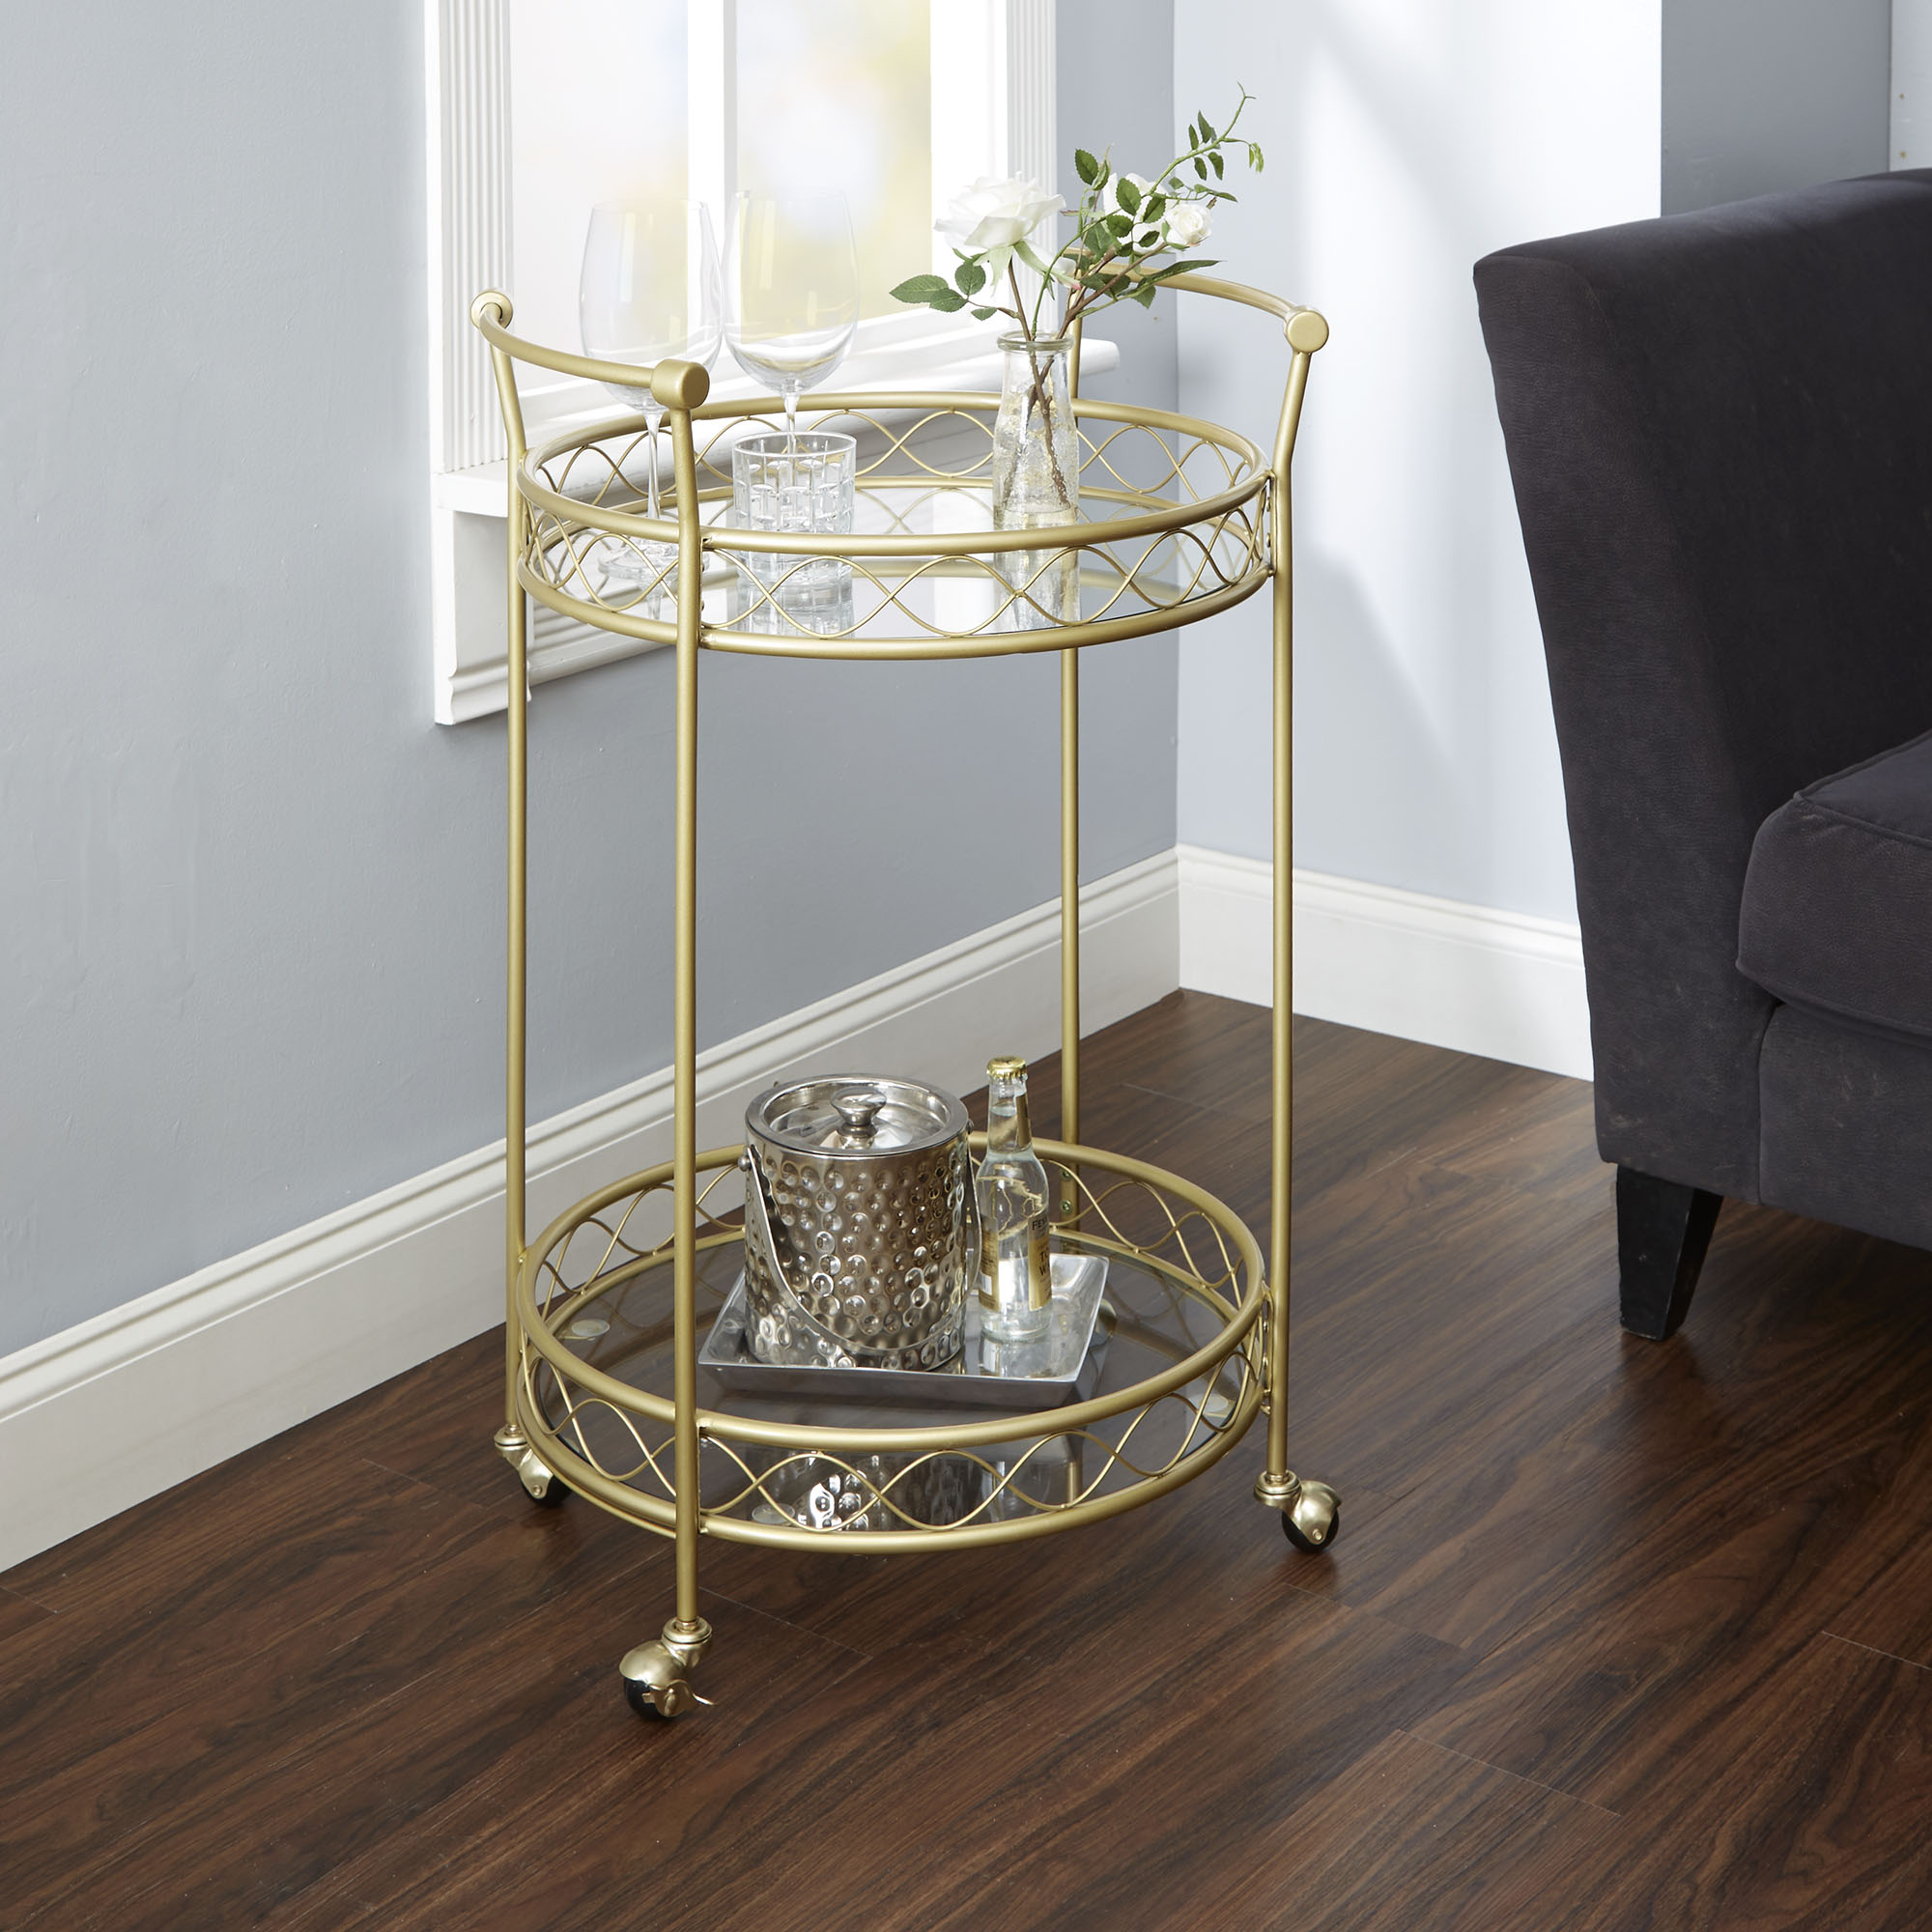 Better Homes & Gardens Mirabella Gold Metal Serving Barcart with Glass Shelves - image 1 of 3